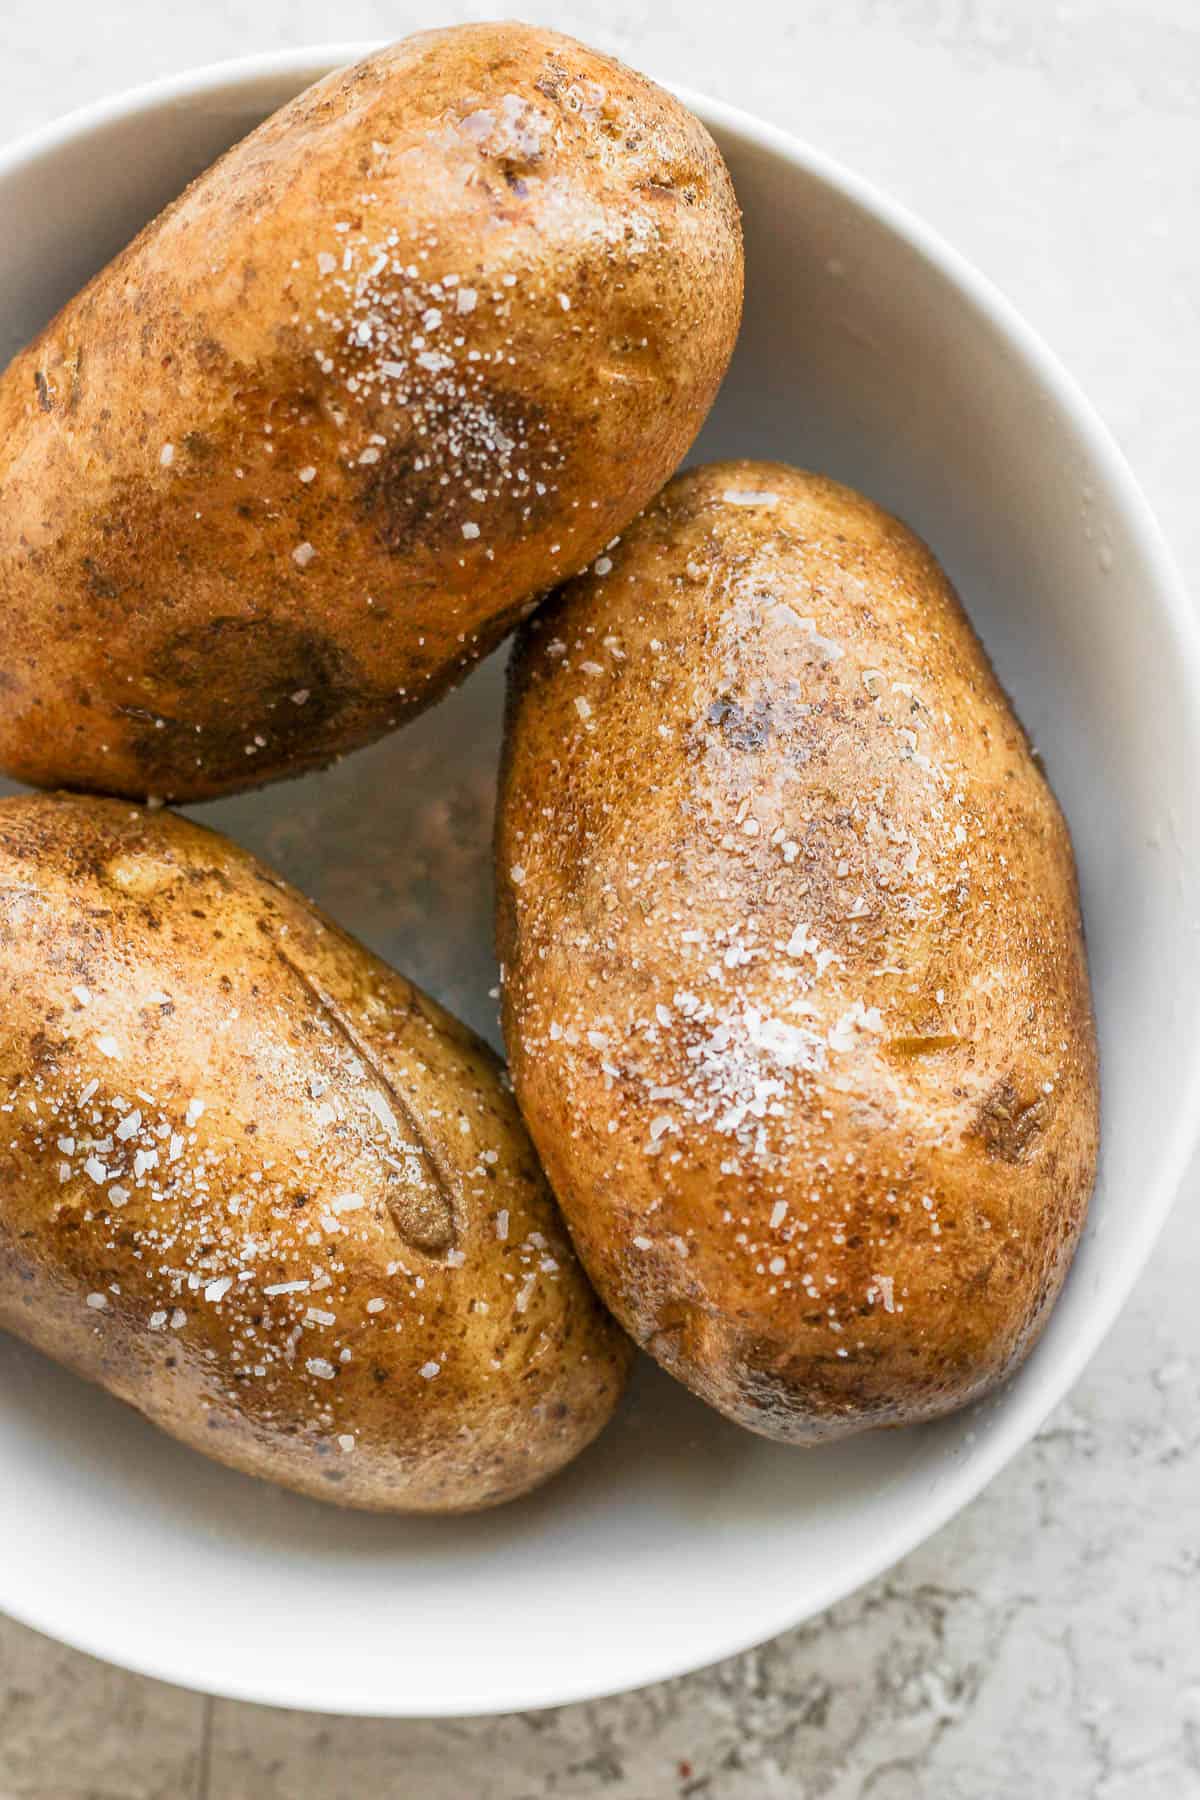 Three oven baked potatoes in a bowl with a sprinkling of salt.